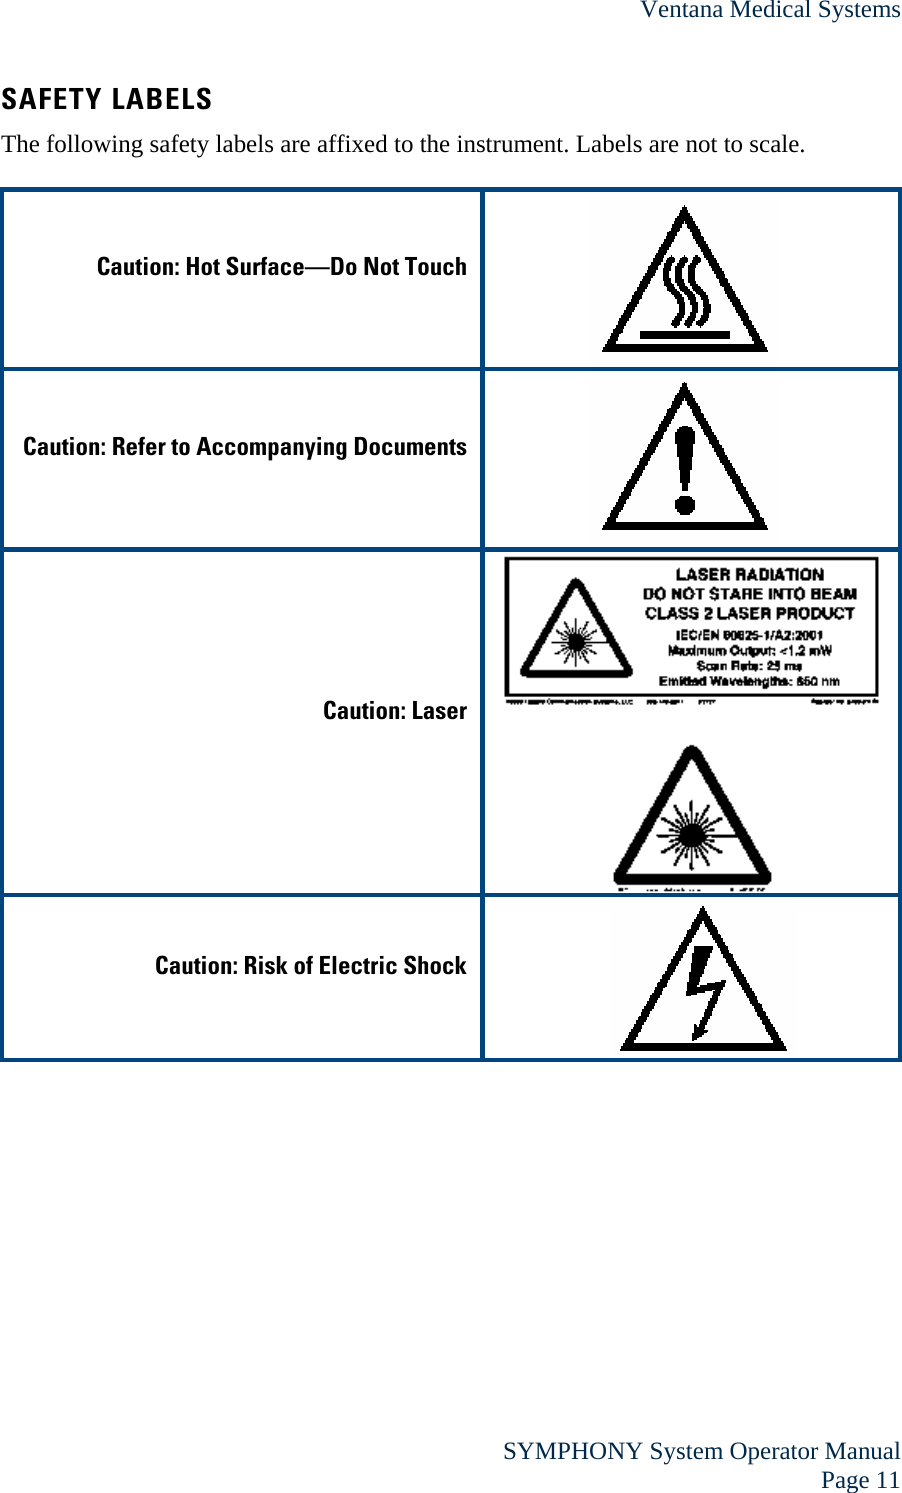 Ventana Medical Systems  SYMPHONY System Operator Manual Page 11 SAFETY LABELS The following safety labels are affixed to the instrument. Labels are not to scale.  Caution: Hot Surface—Do Not Touch                   Caution: Refer to Accompanying Documents                   Caution: Laser                       Caution: Risk of Electric Shock                      